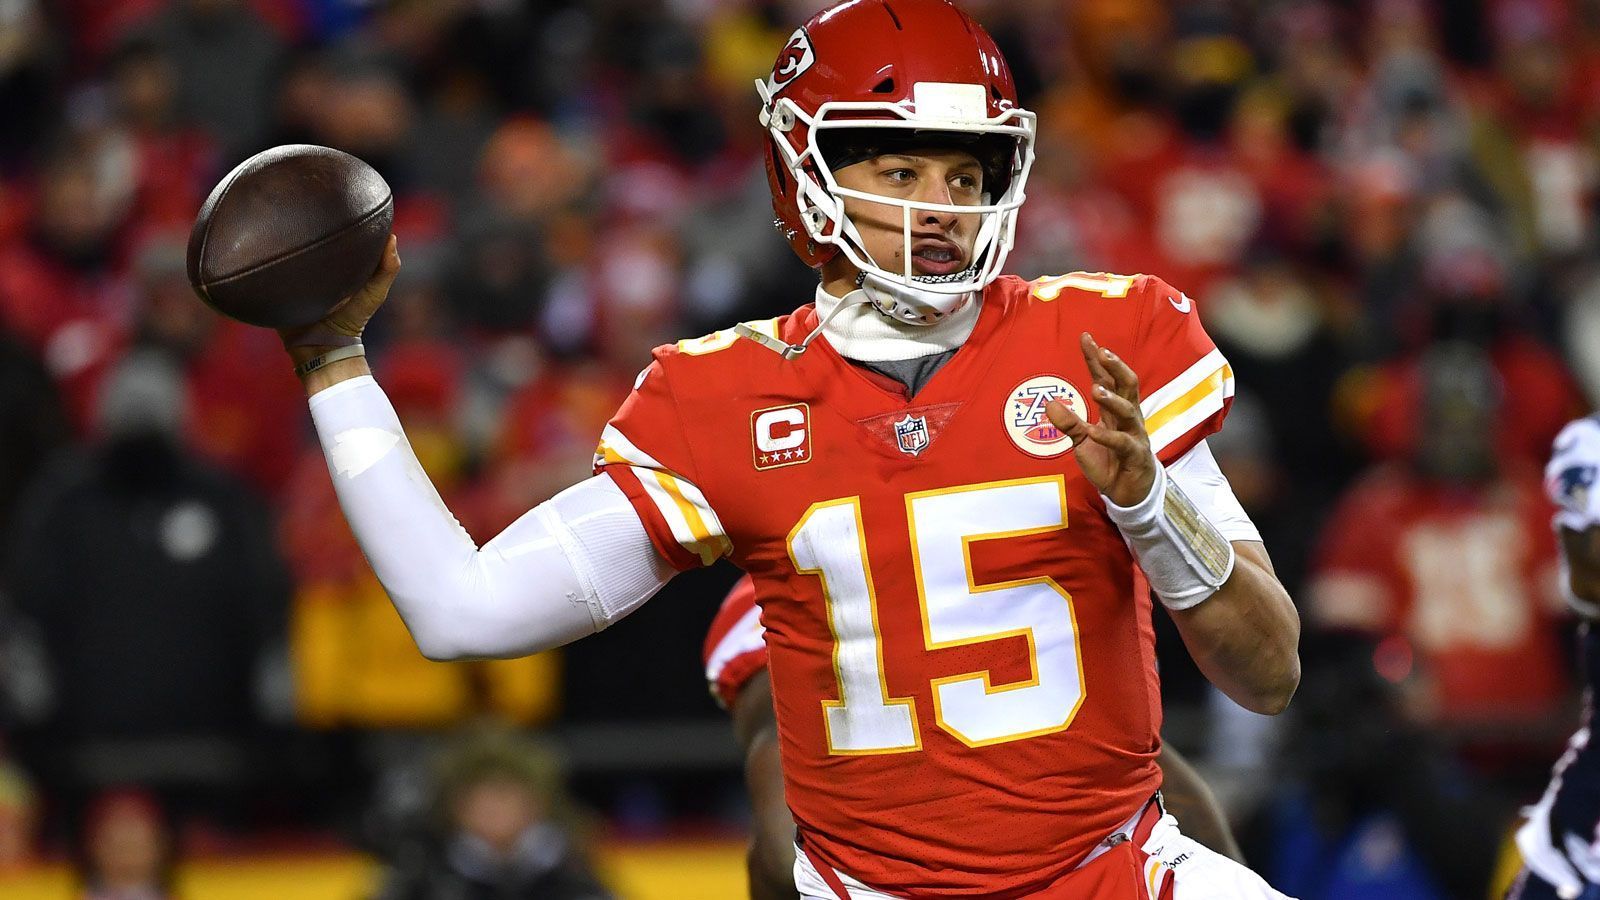 
                <strong>6 - Kansas City Chiefs</strong><br>
                Patrick Mahomes (Quarterback), Tyreek Hill (Wide Receiver), Travis Kelce (Tight End), Chris Jones (Defensive Tackle), Frank Clark (Defensive End), Mitchell Schwartz (Offensive Tackle)
              